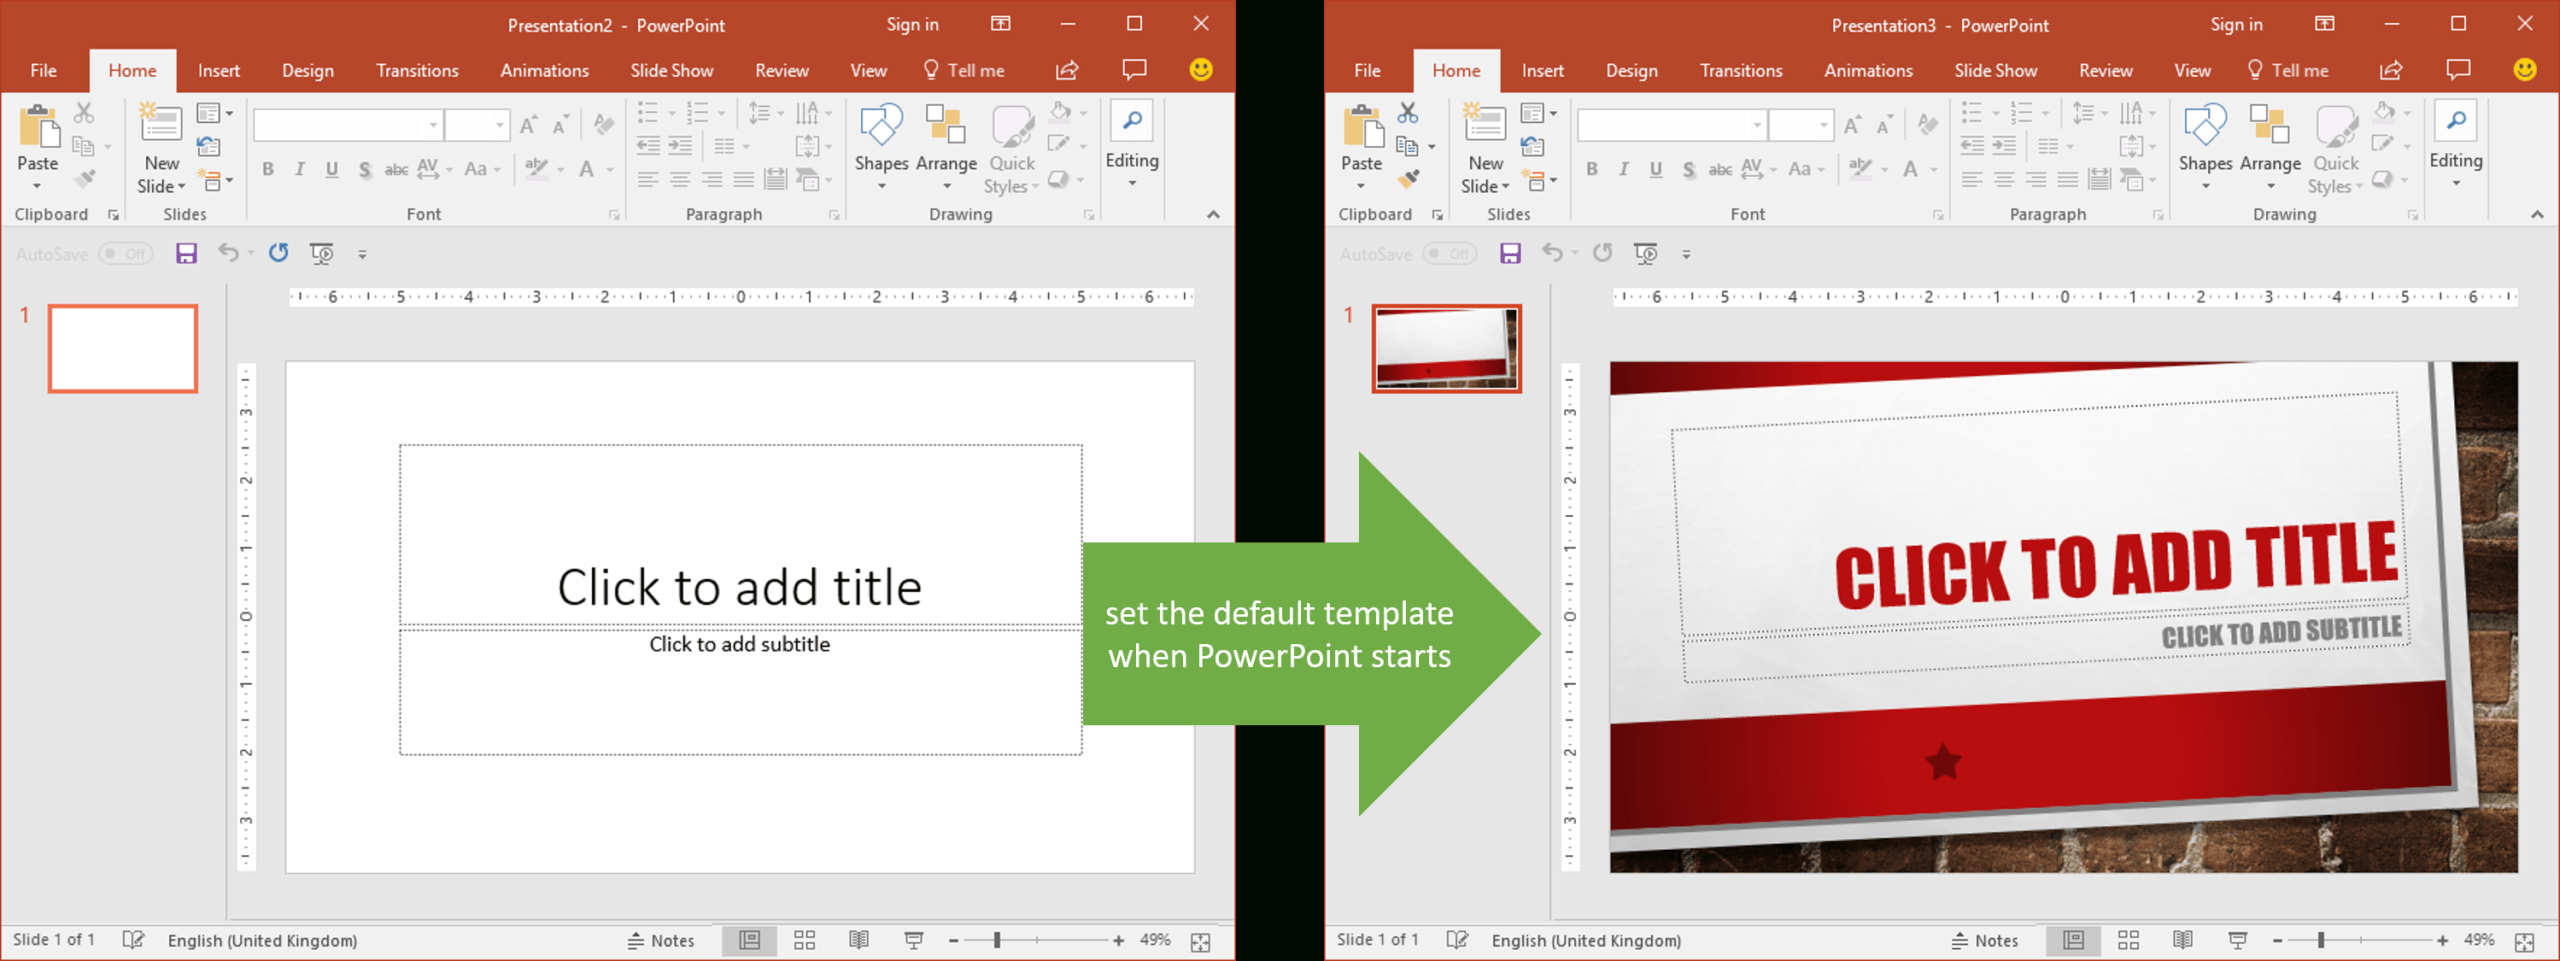 Set The Default Template When Powerpoint Starts | Youpresent Throughout Powerpoint 2013 Template Location